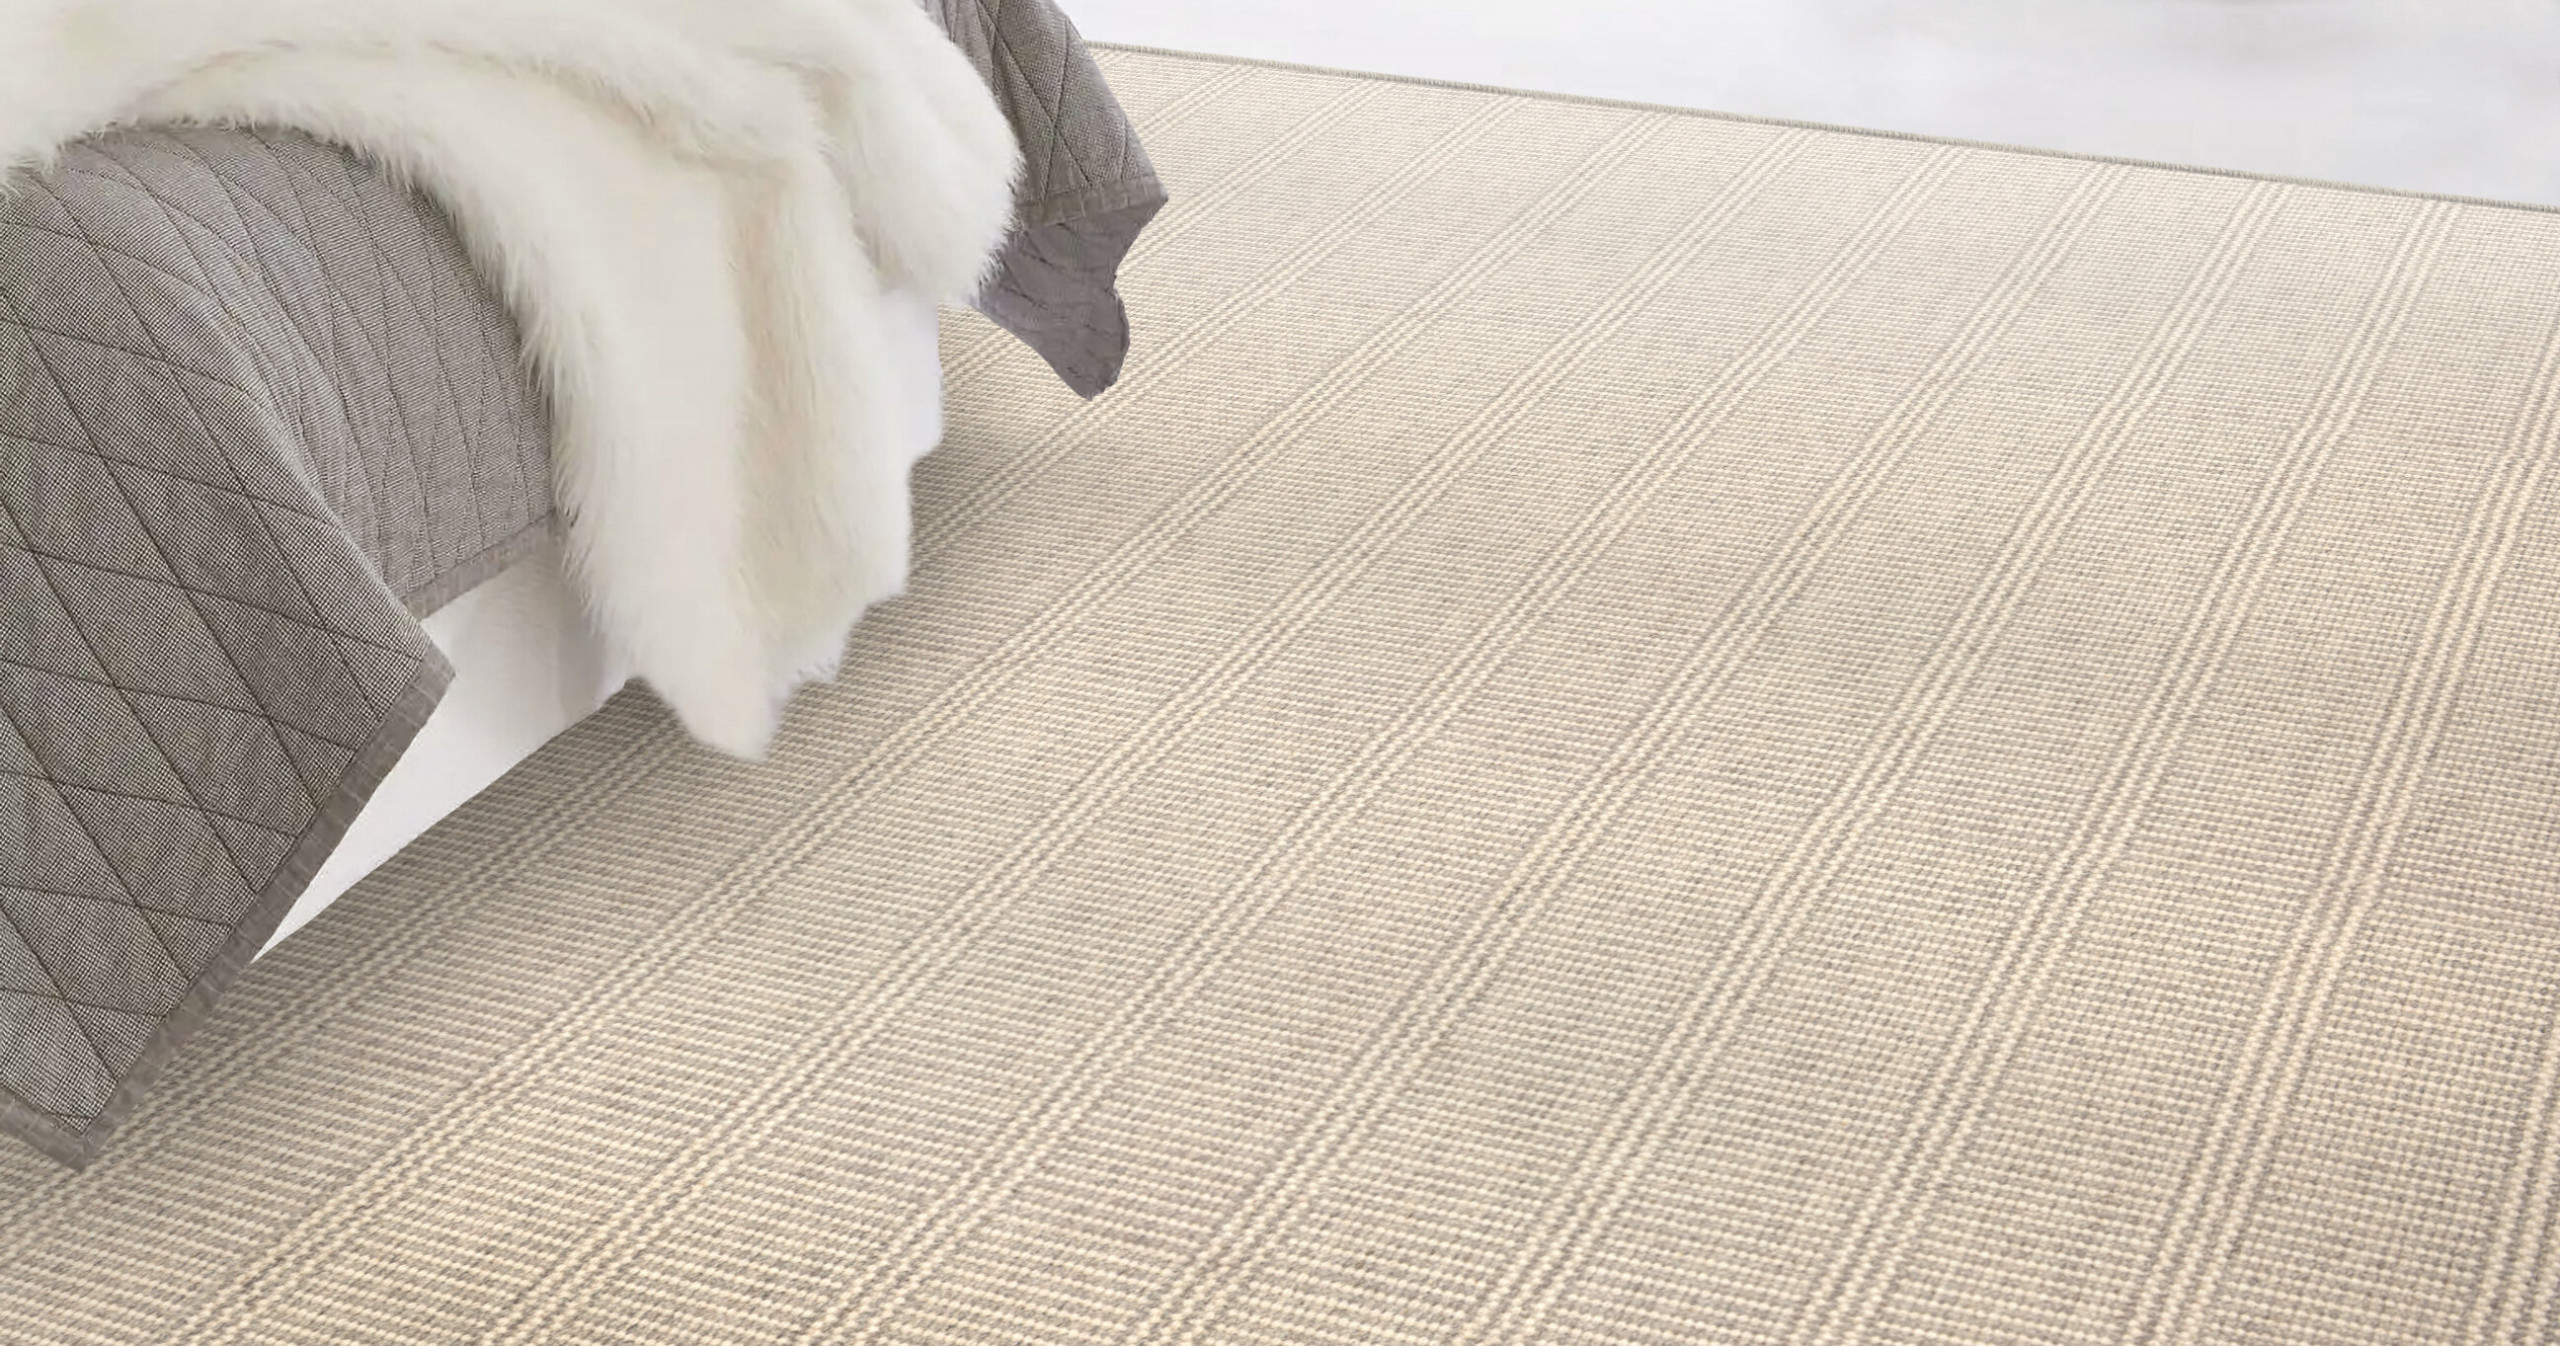 Stanton Carpets. Expert Carpet & Area Rug Selection at Menlo Flooring. Expert Installation Available.